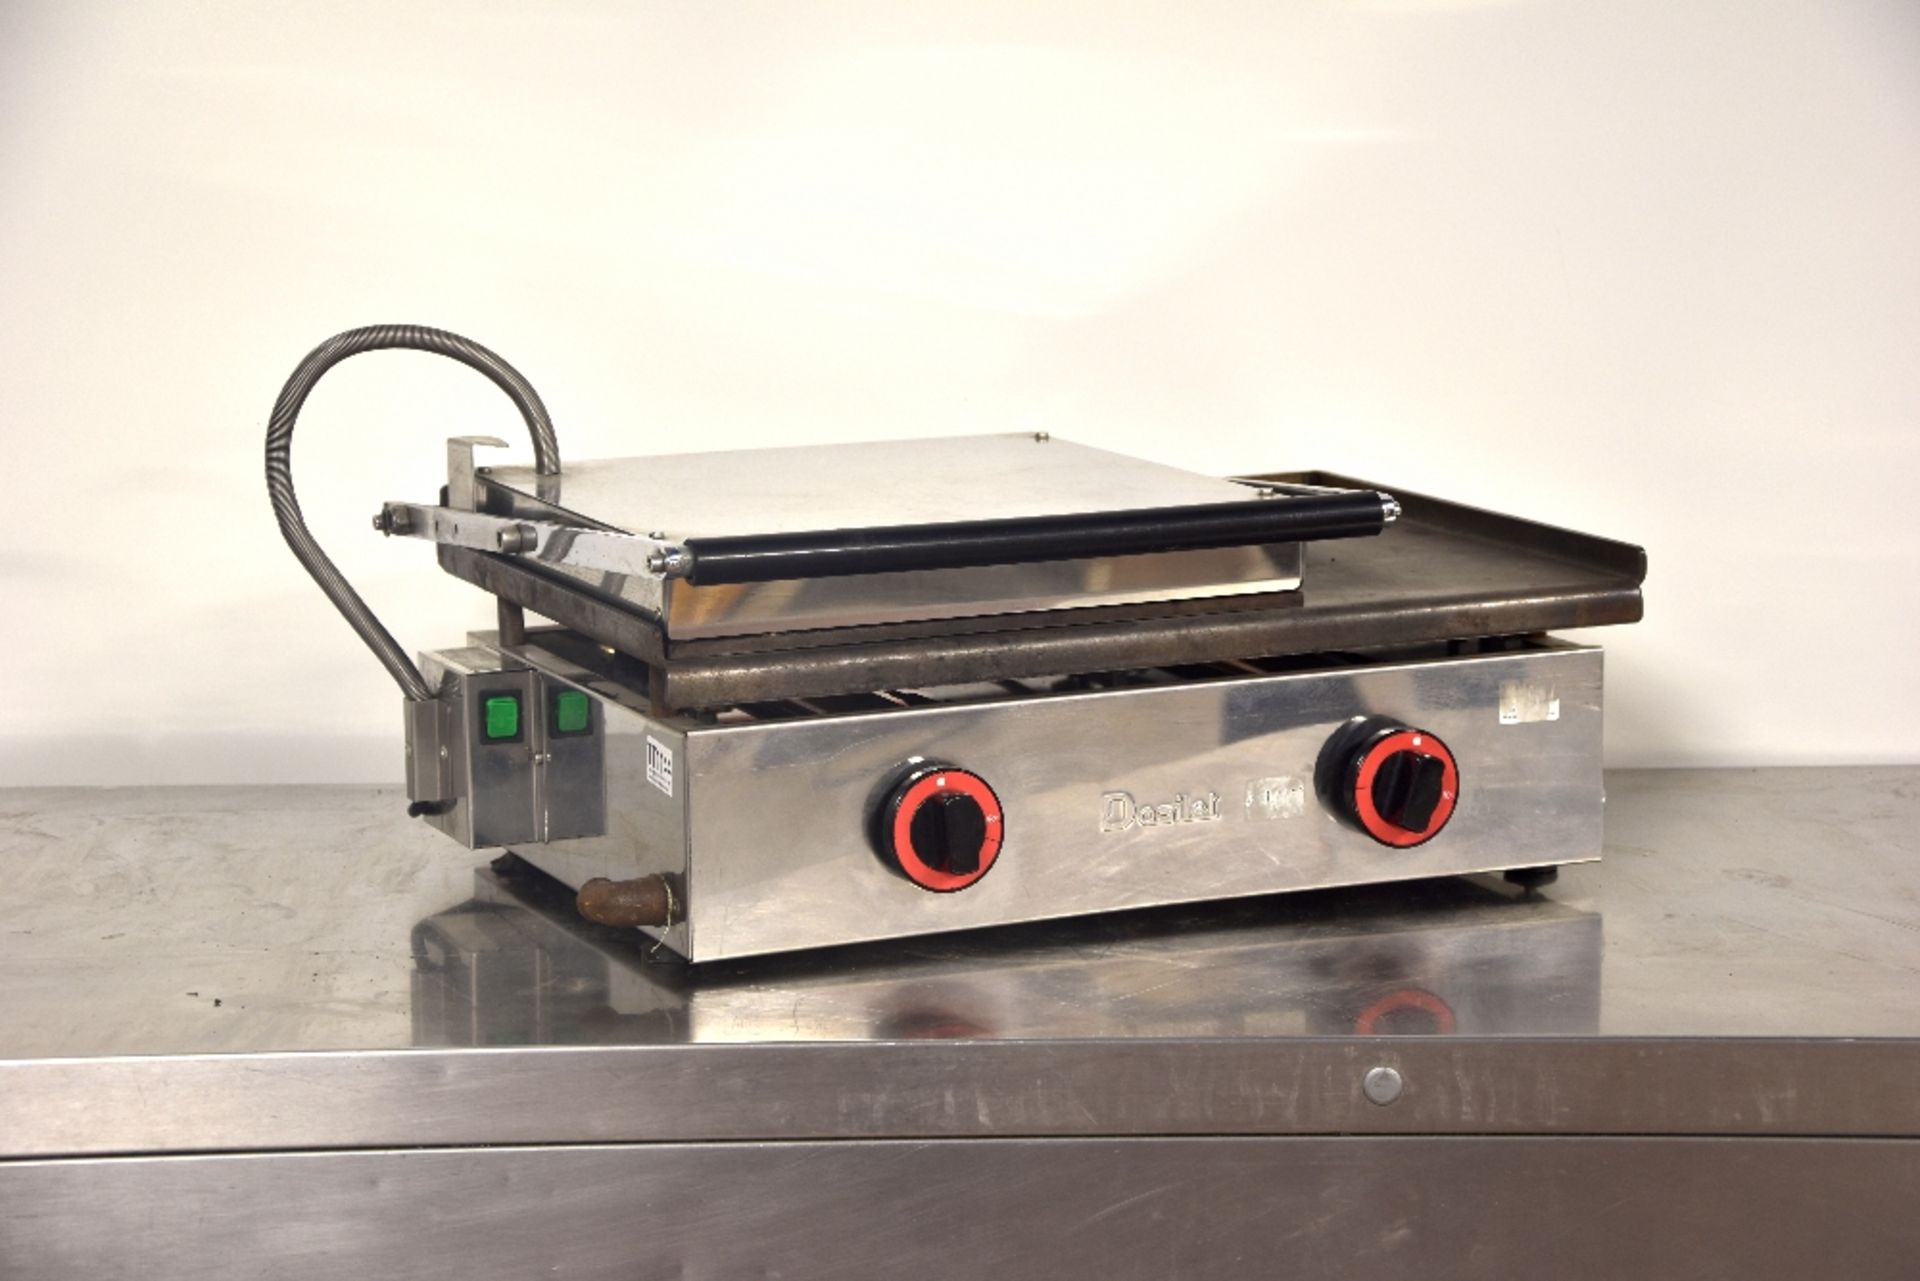 Dualit Large Panini Grill -Ribbed Top Plate – Flat Bottom Plate -1ph - Tested Working - Image 2 of 2